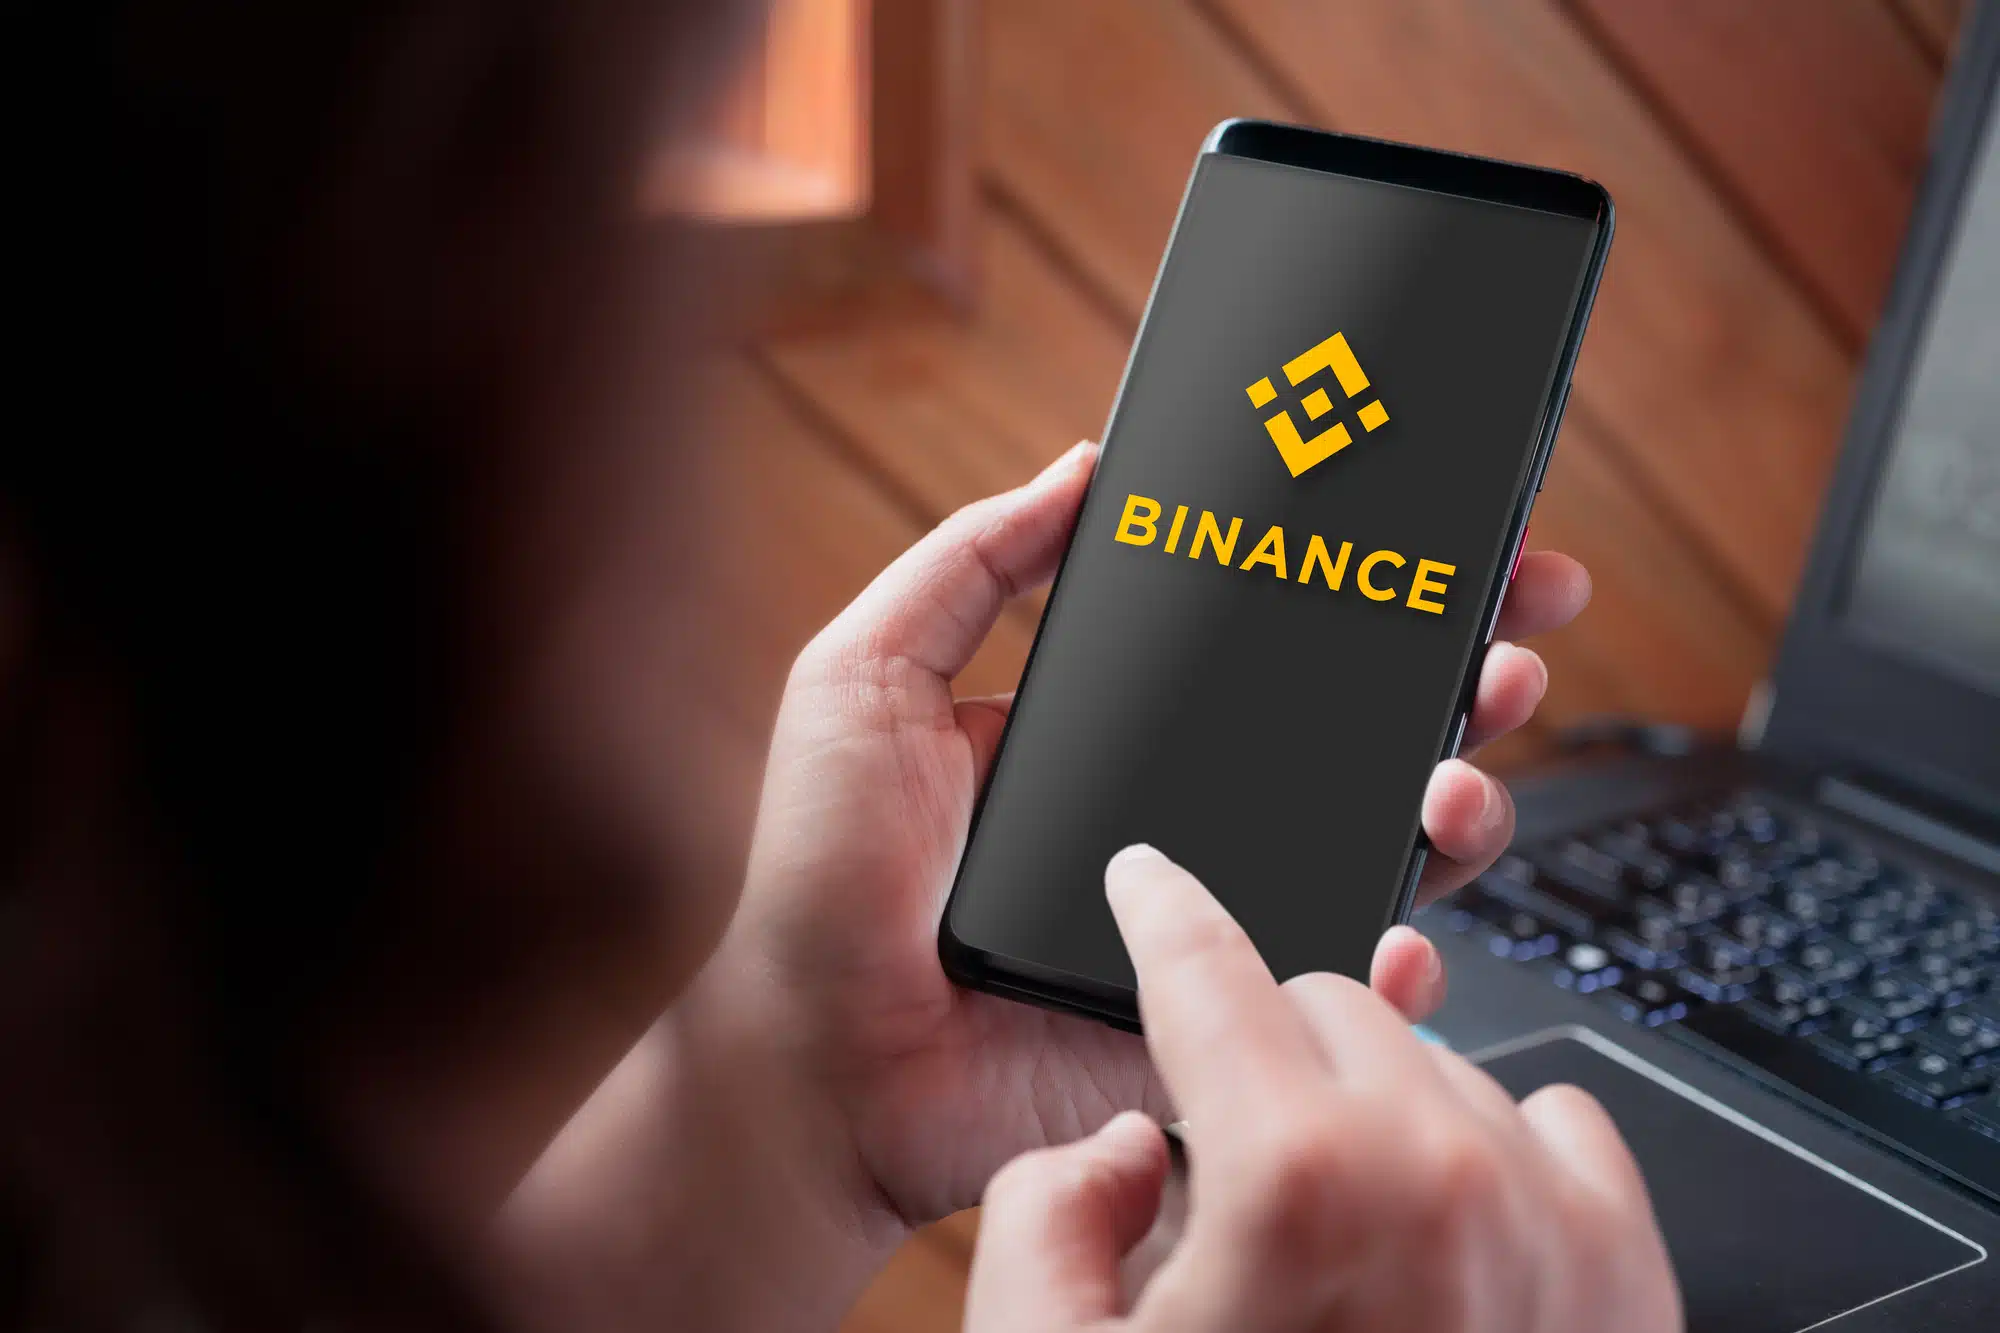 Bangkok, Thailand - Septempber 3, 2019: Hand holding smartphone with Binance logo on screen. Binance is a global cryptocurrency exchange that provides a platform for trading more than 100 cryptocurrencies.